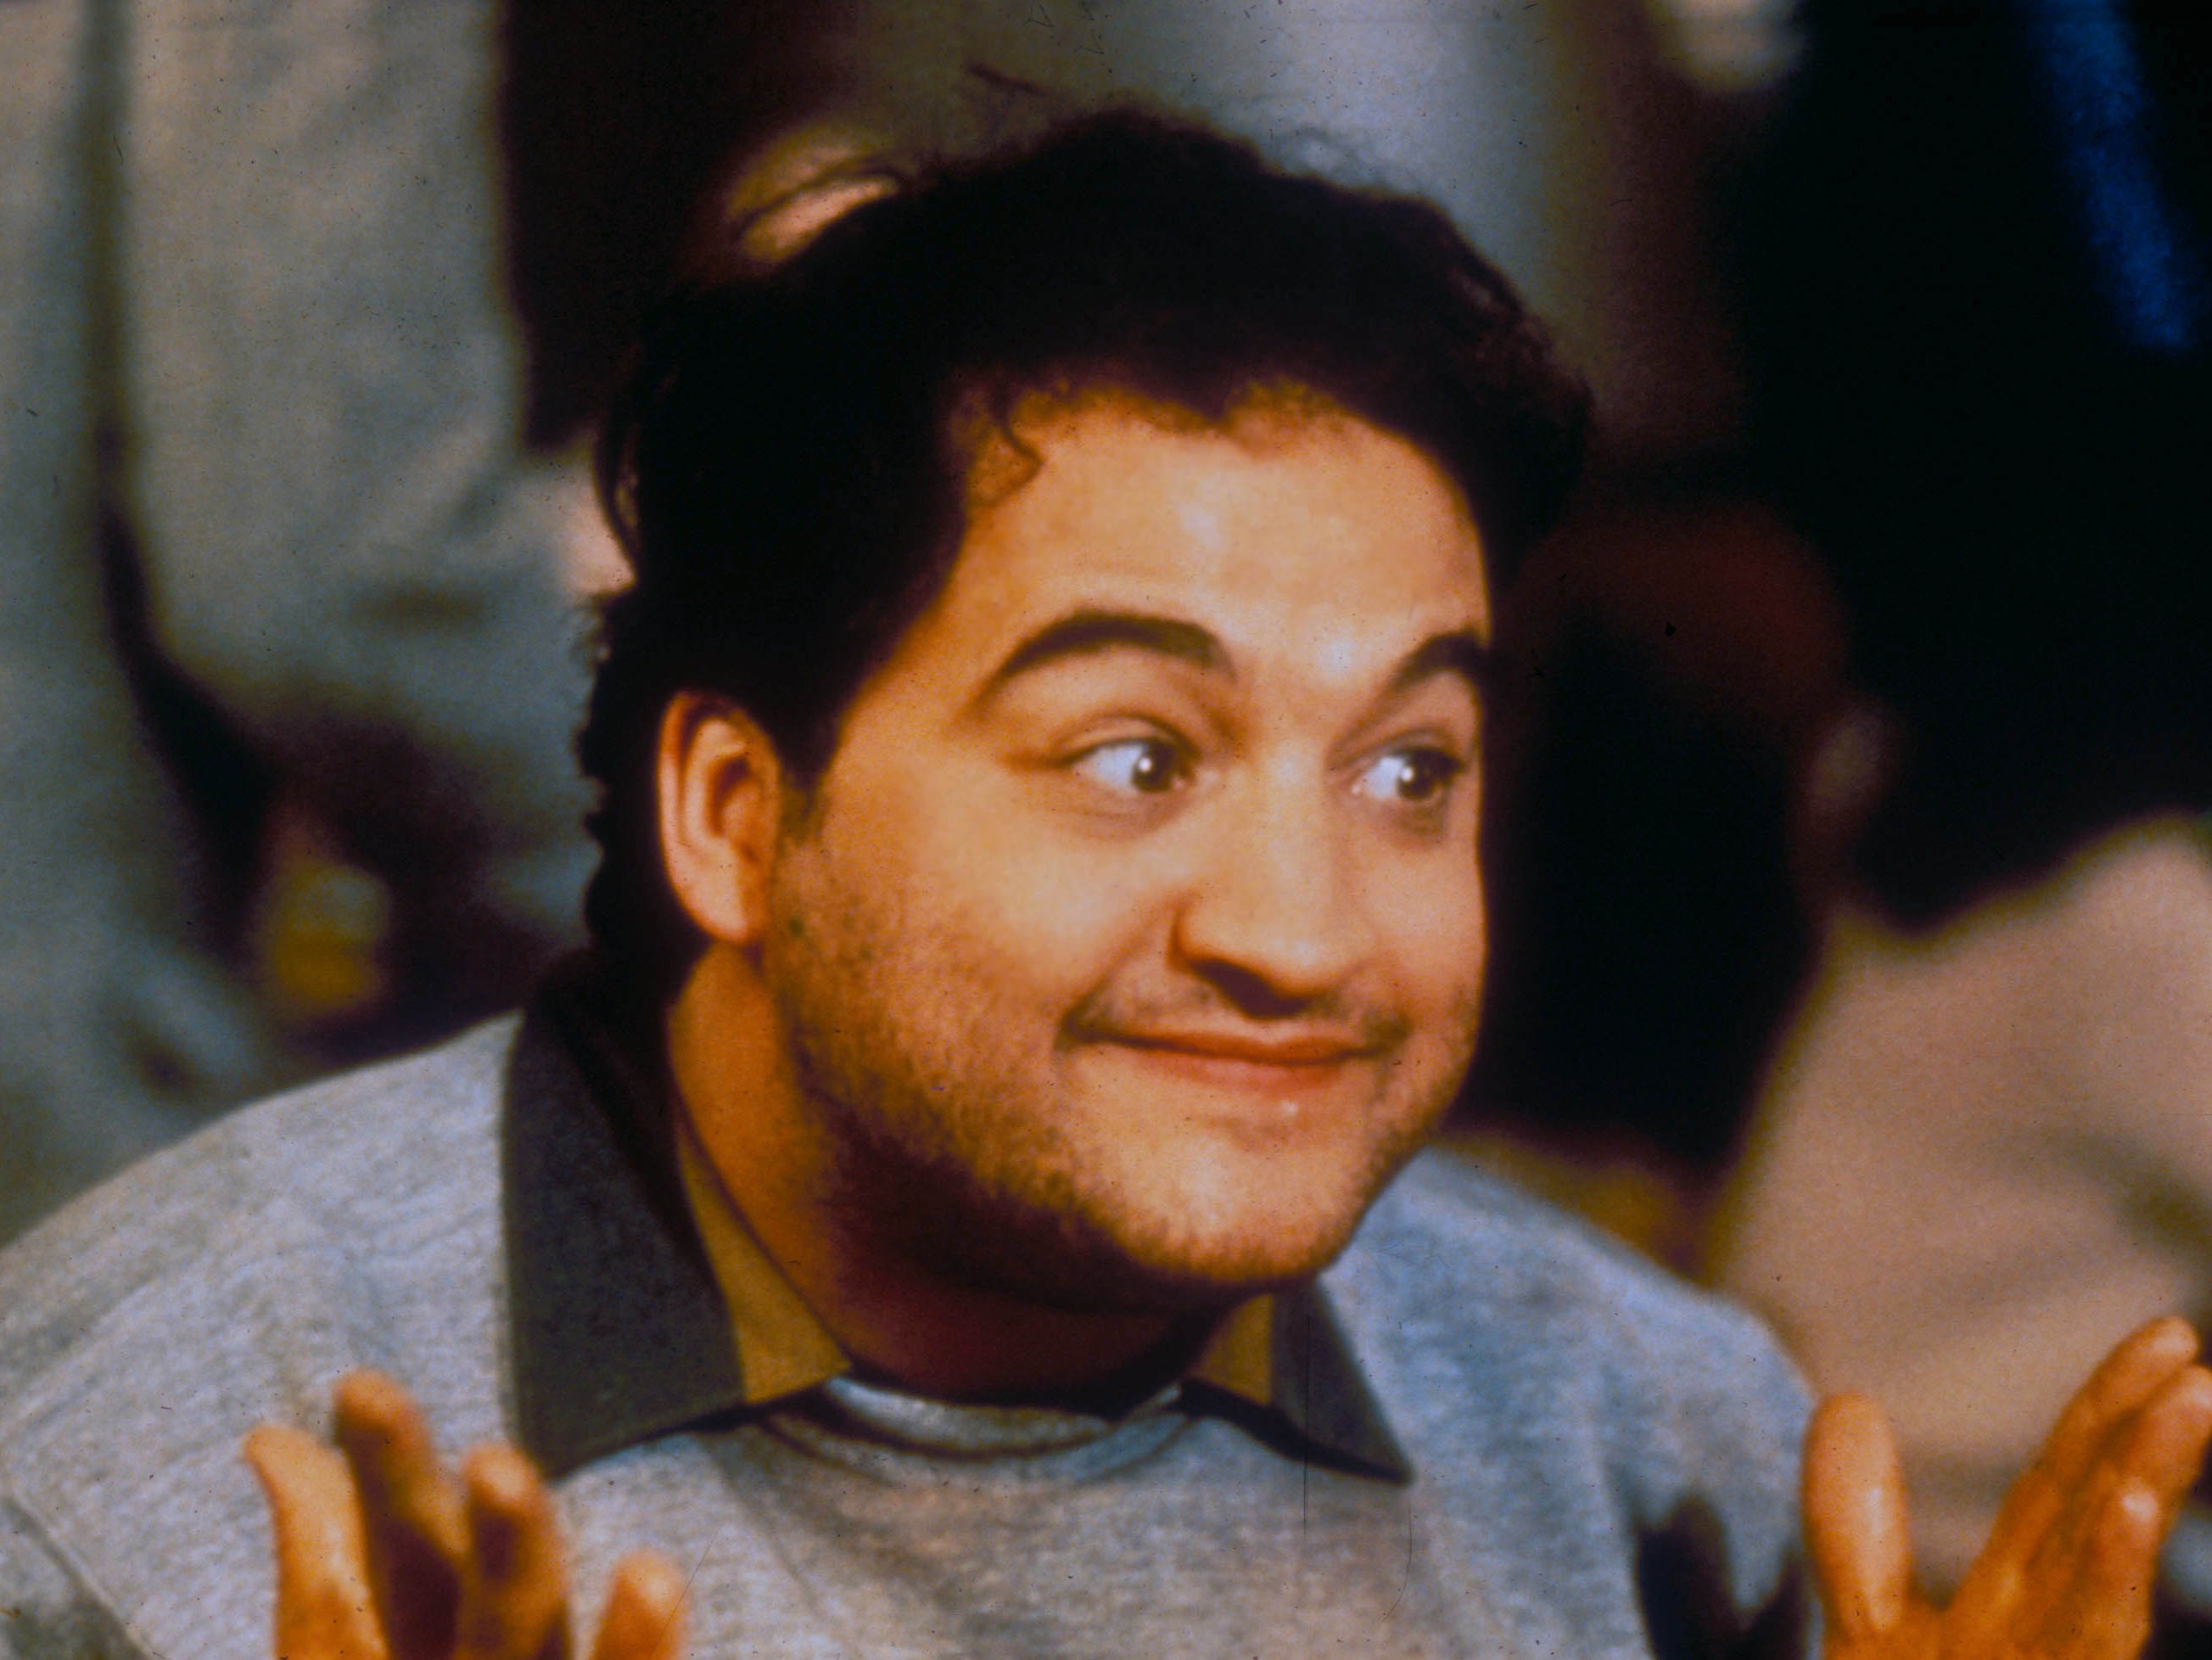 Belushi died from an accidental drug overdose in 1982, aged 33